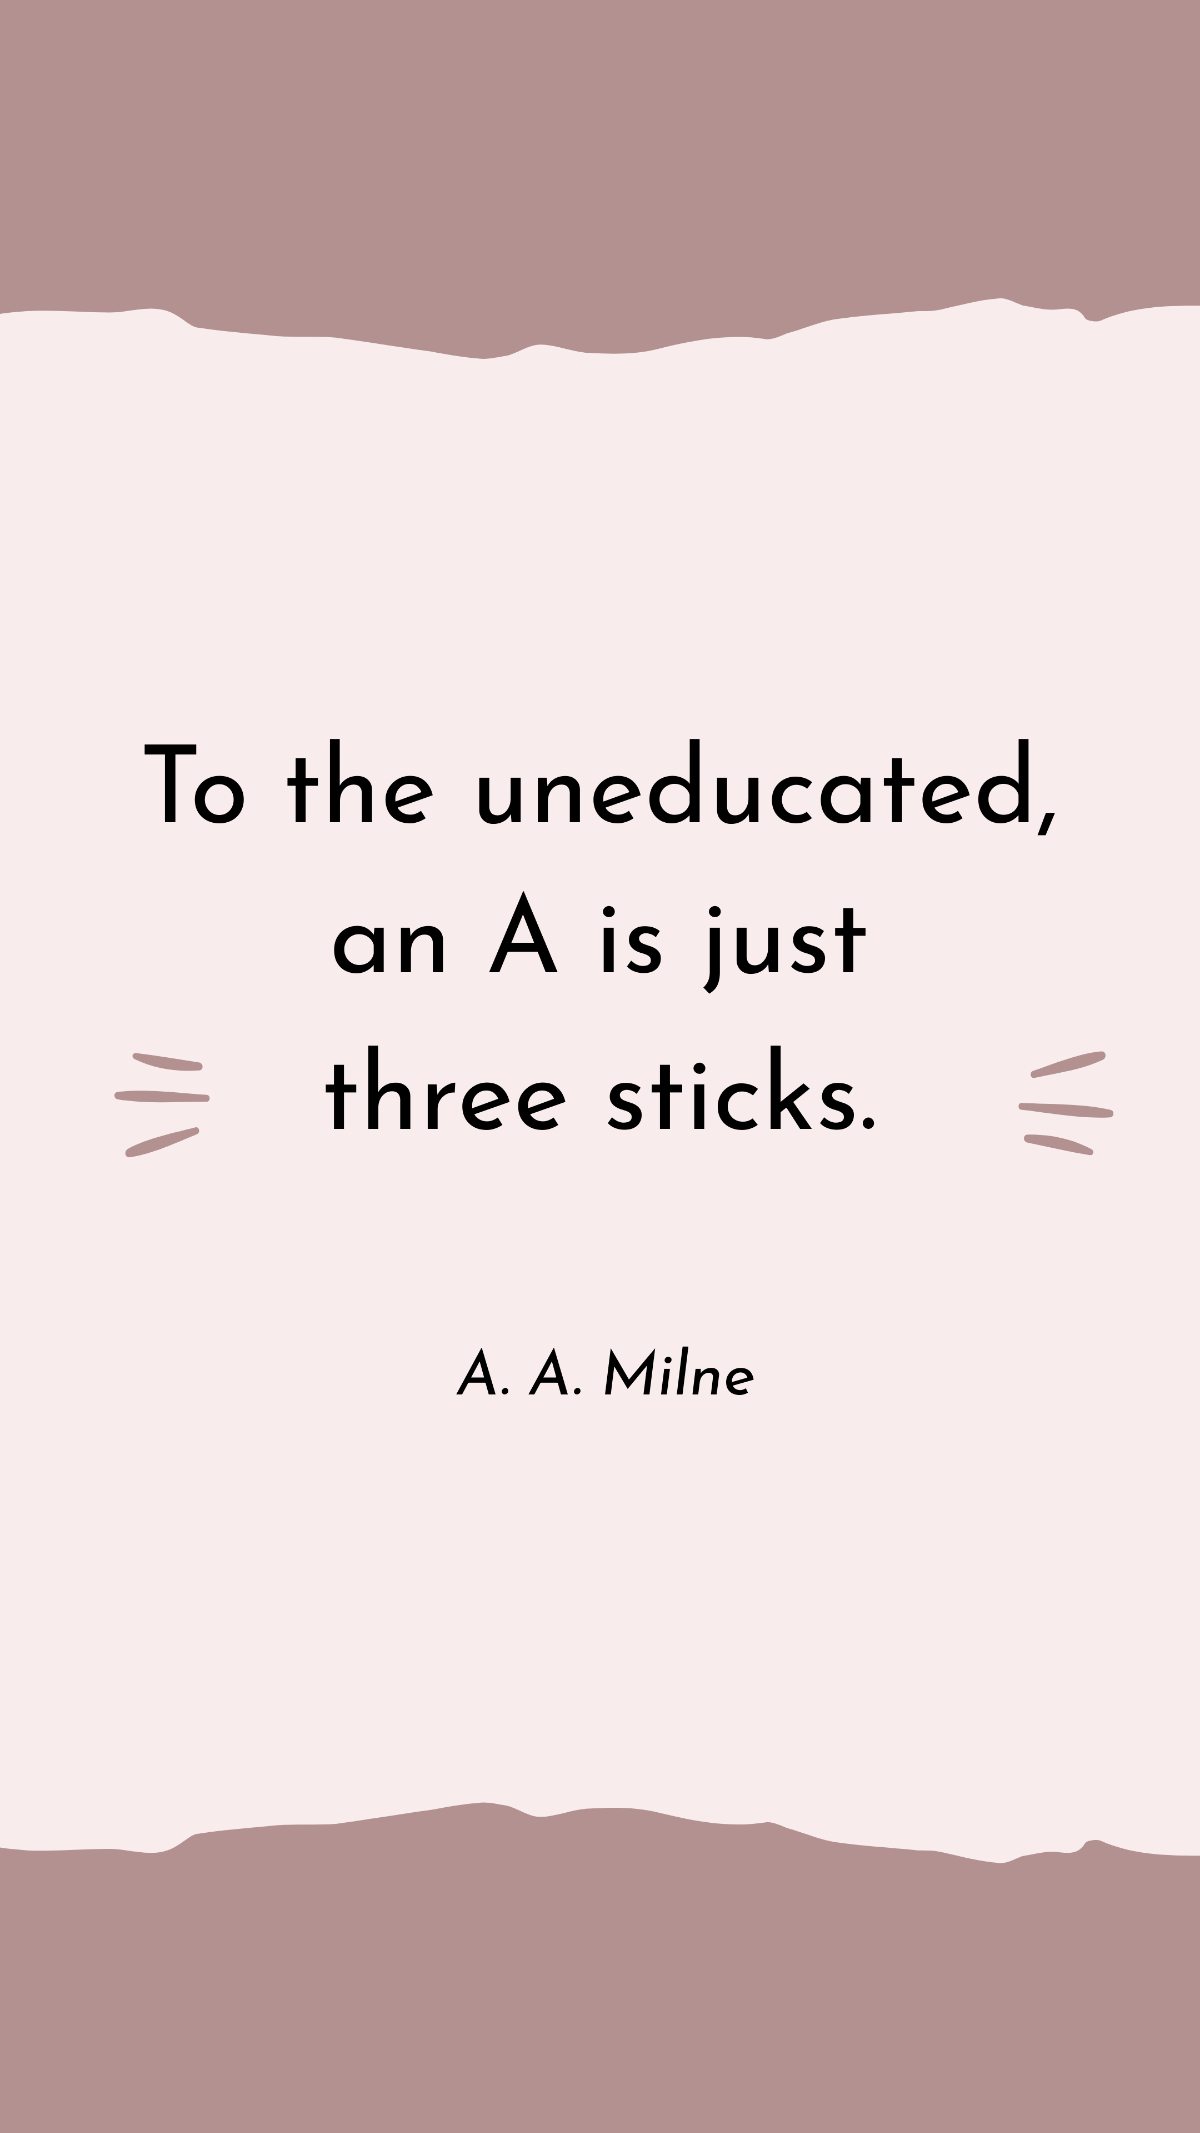 Free A. A. Milne - To the uneducated, an A is just three sticks. Template